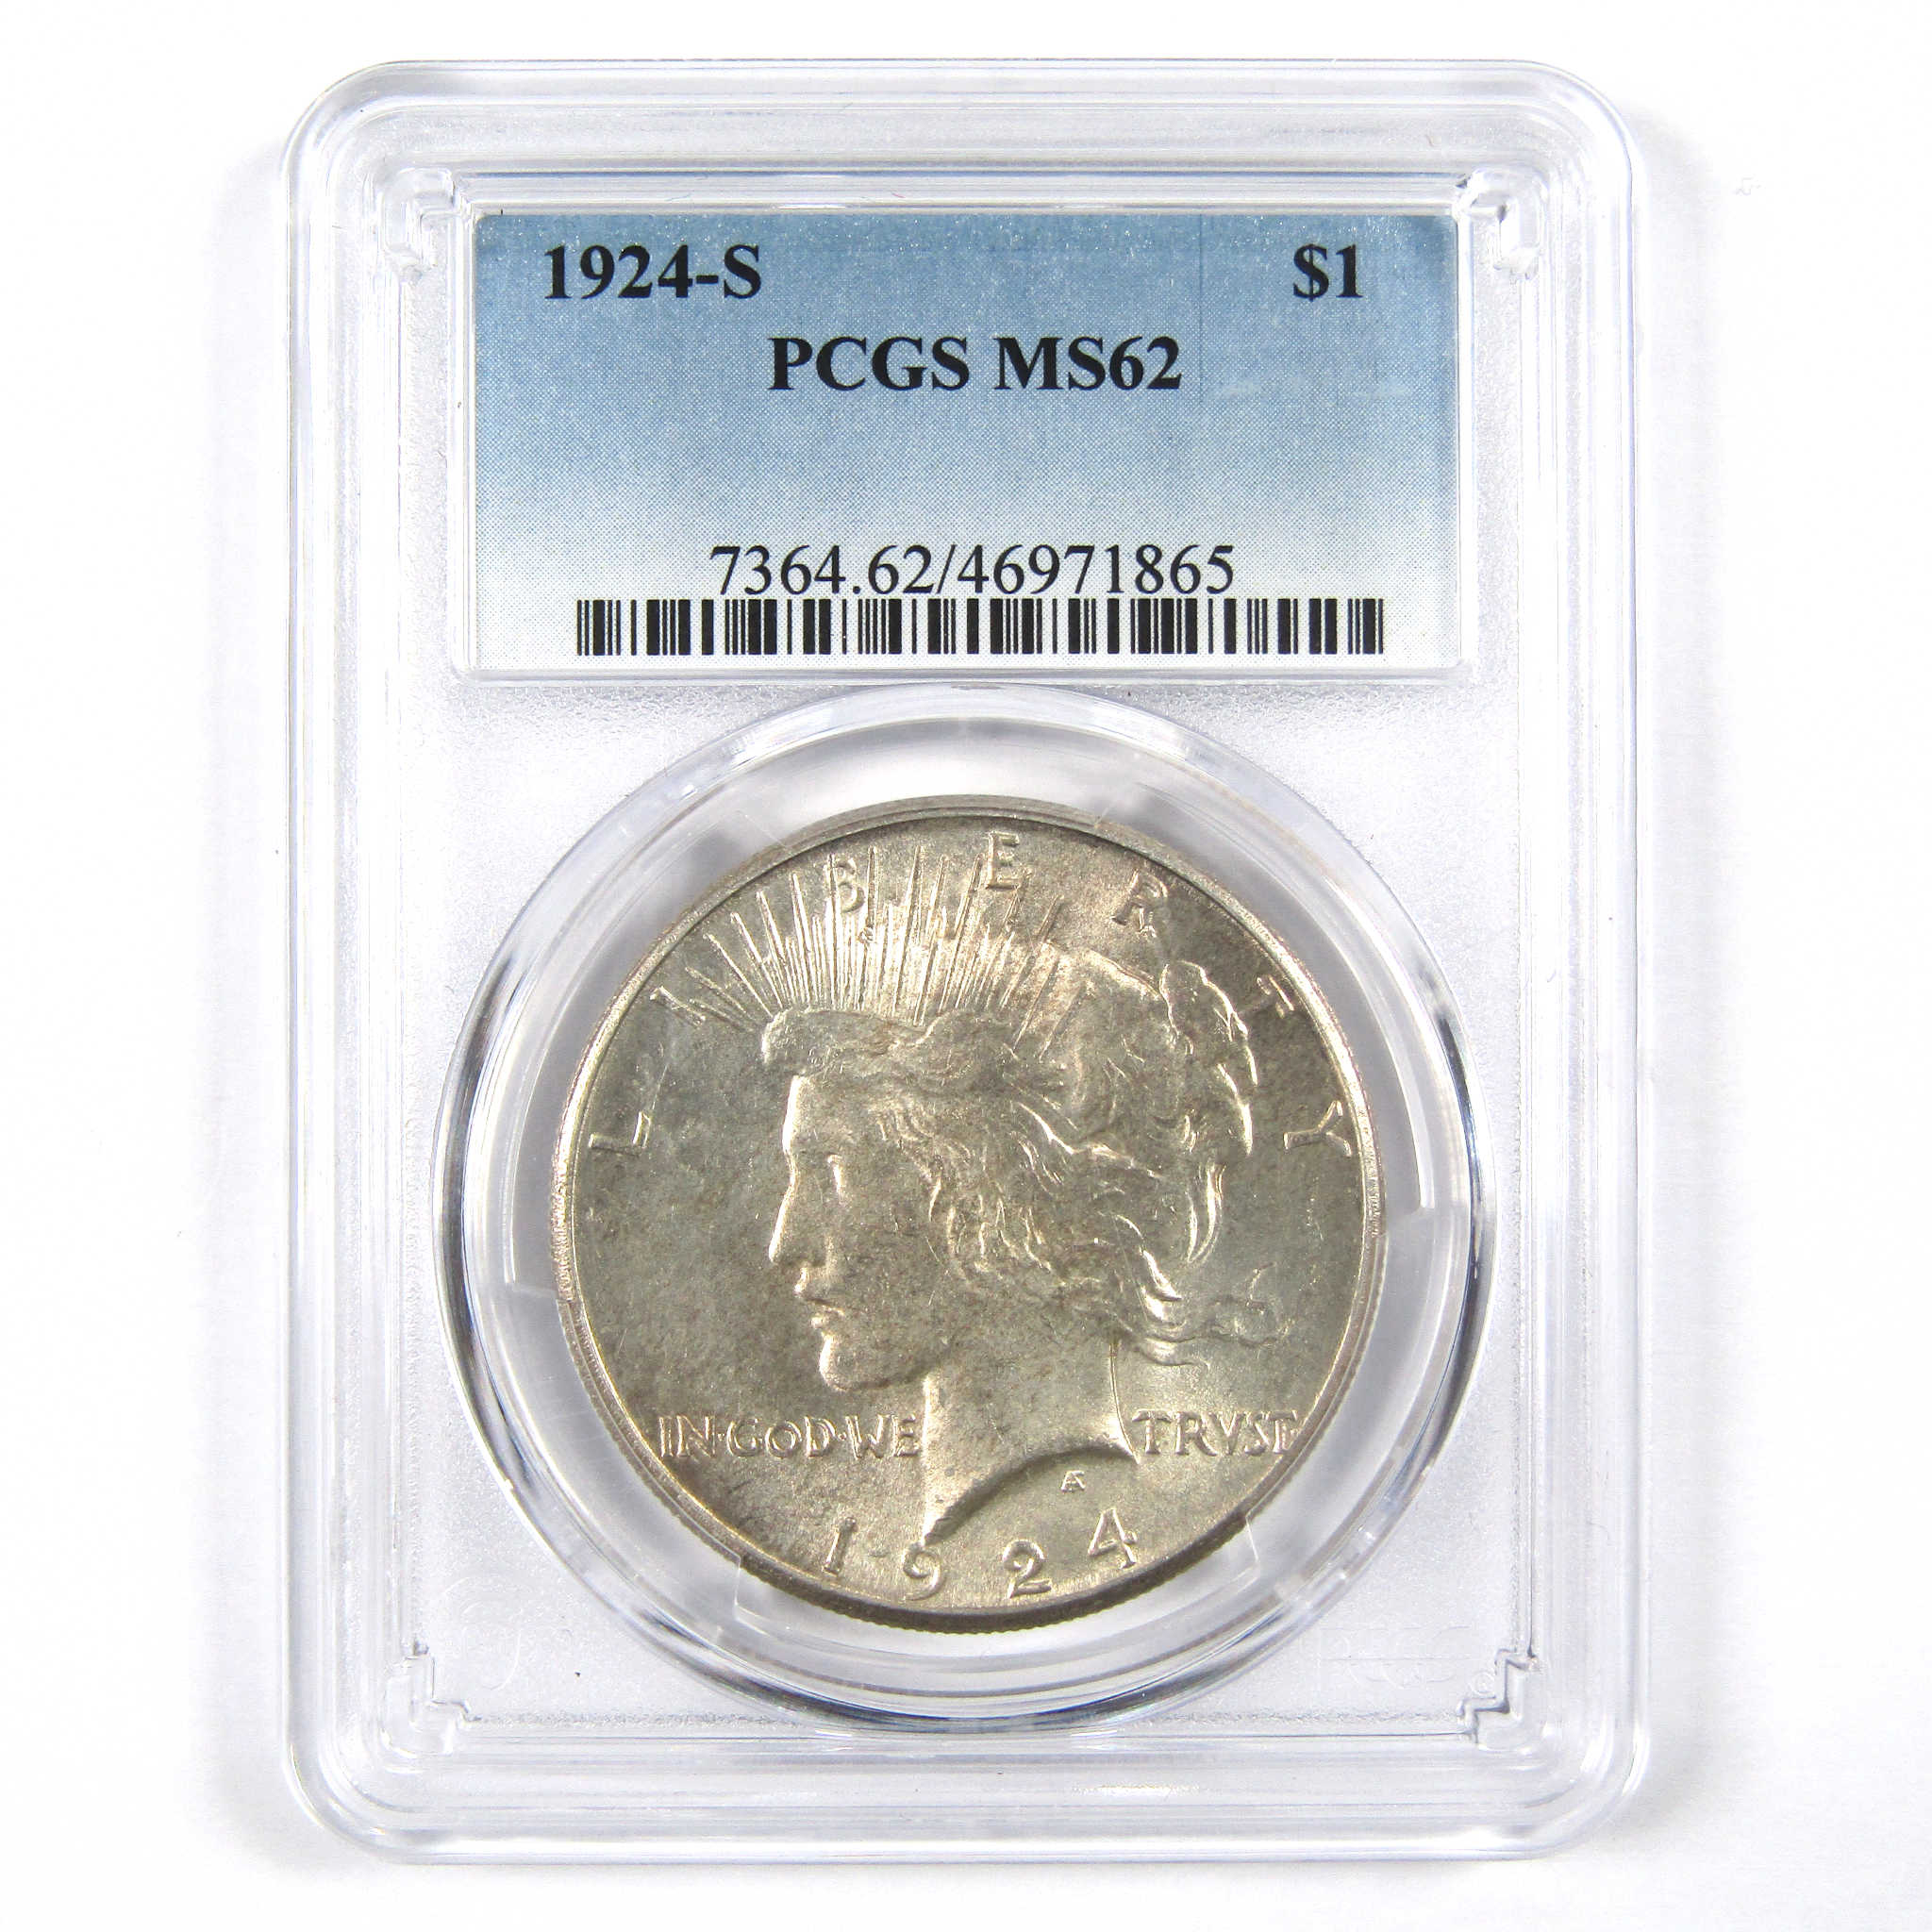 1924 S Peace Dollar MS 62 PCGS 90% Silver $1 Uncirculated SKU:I9244